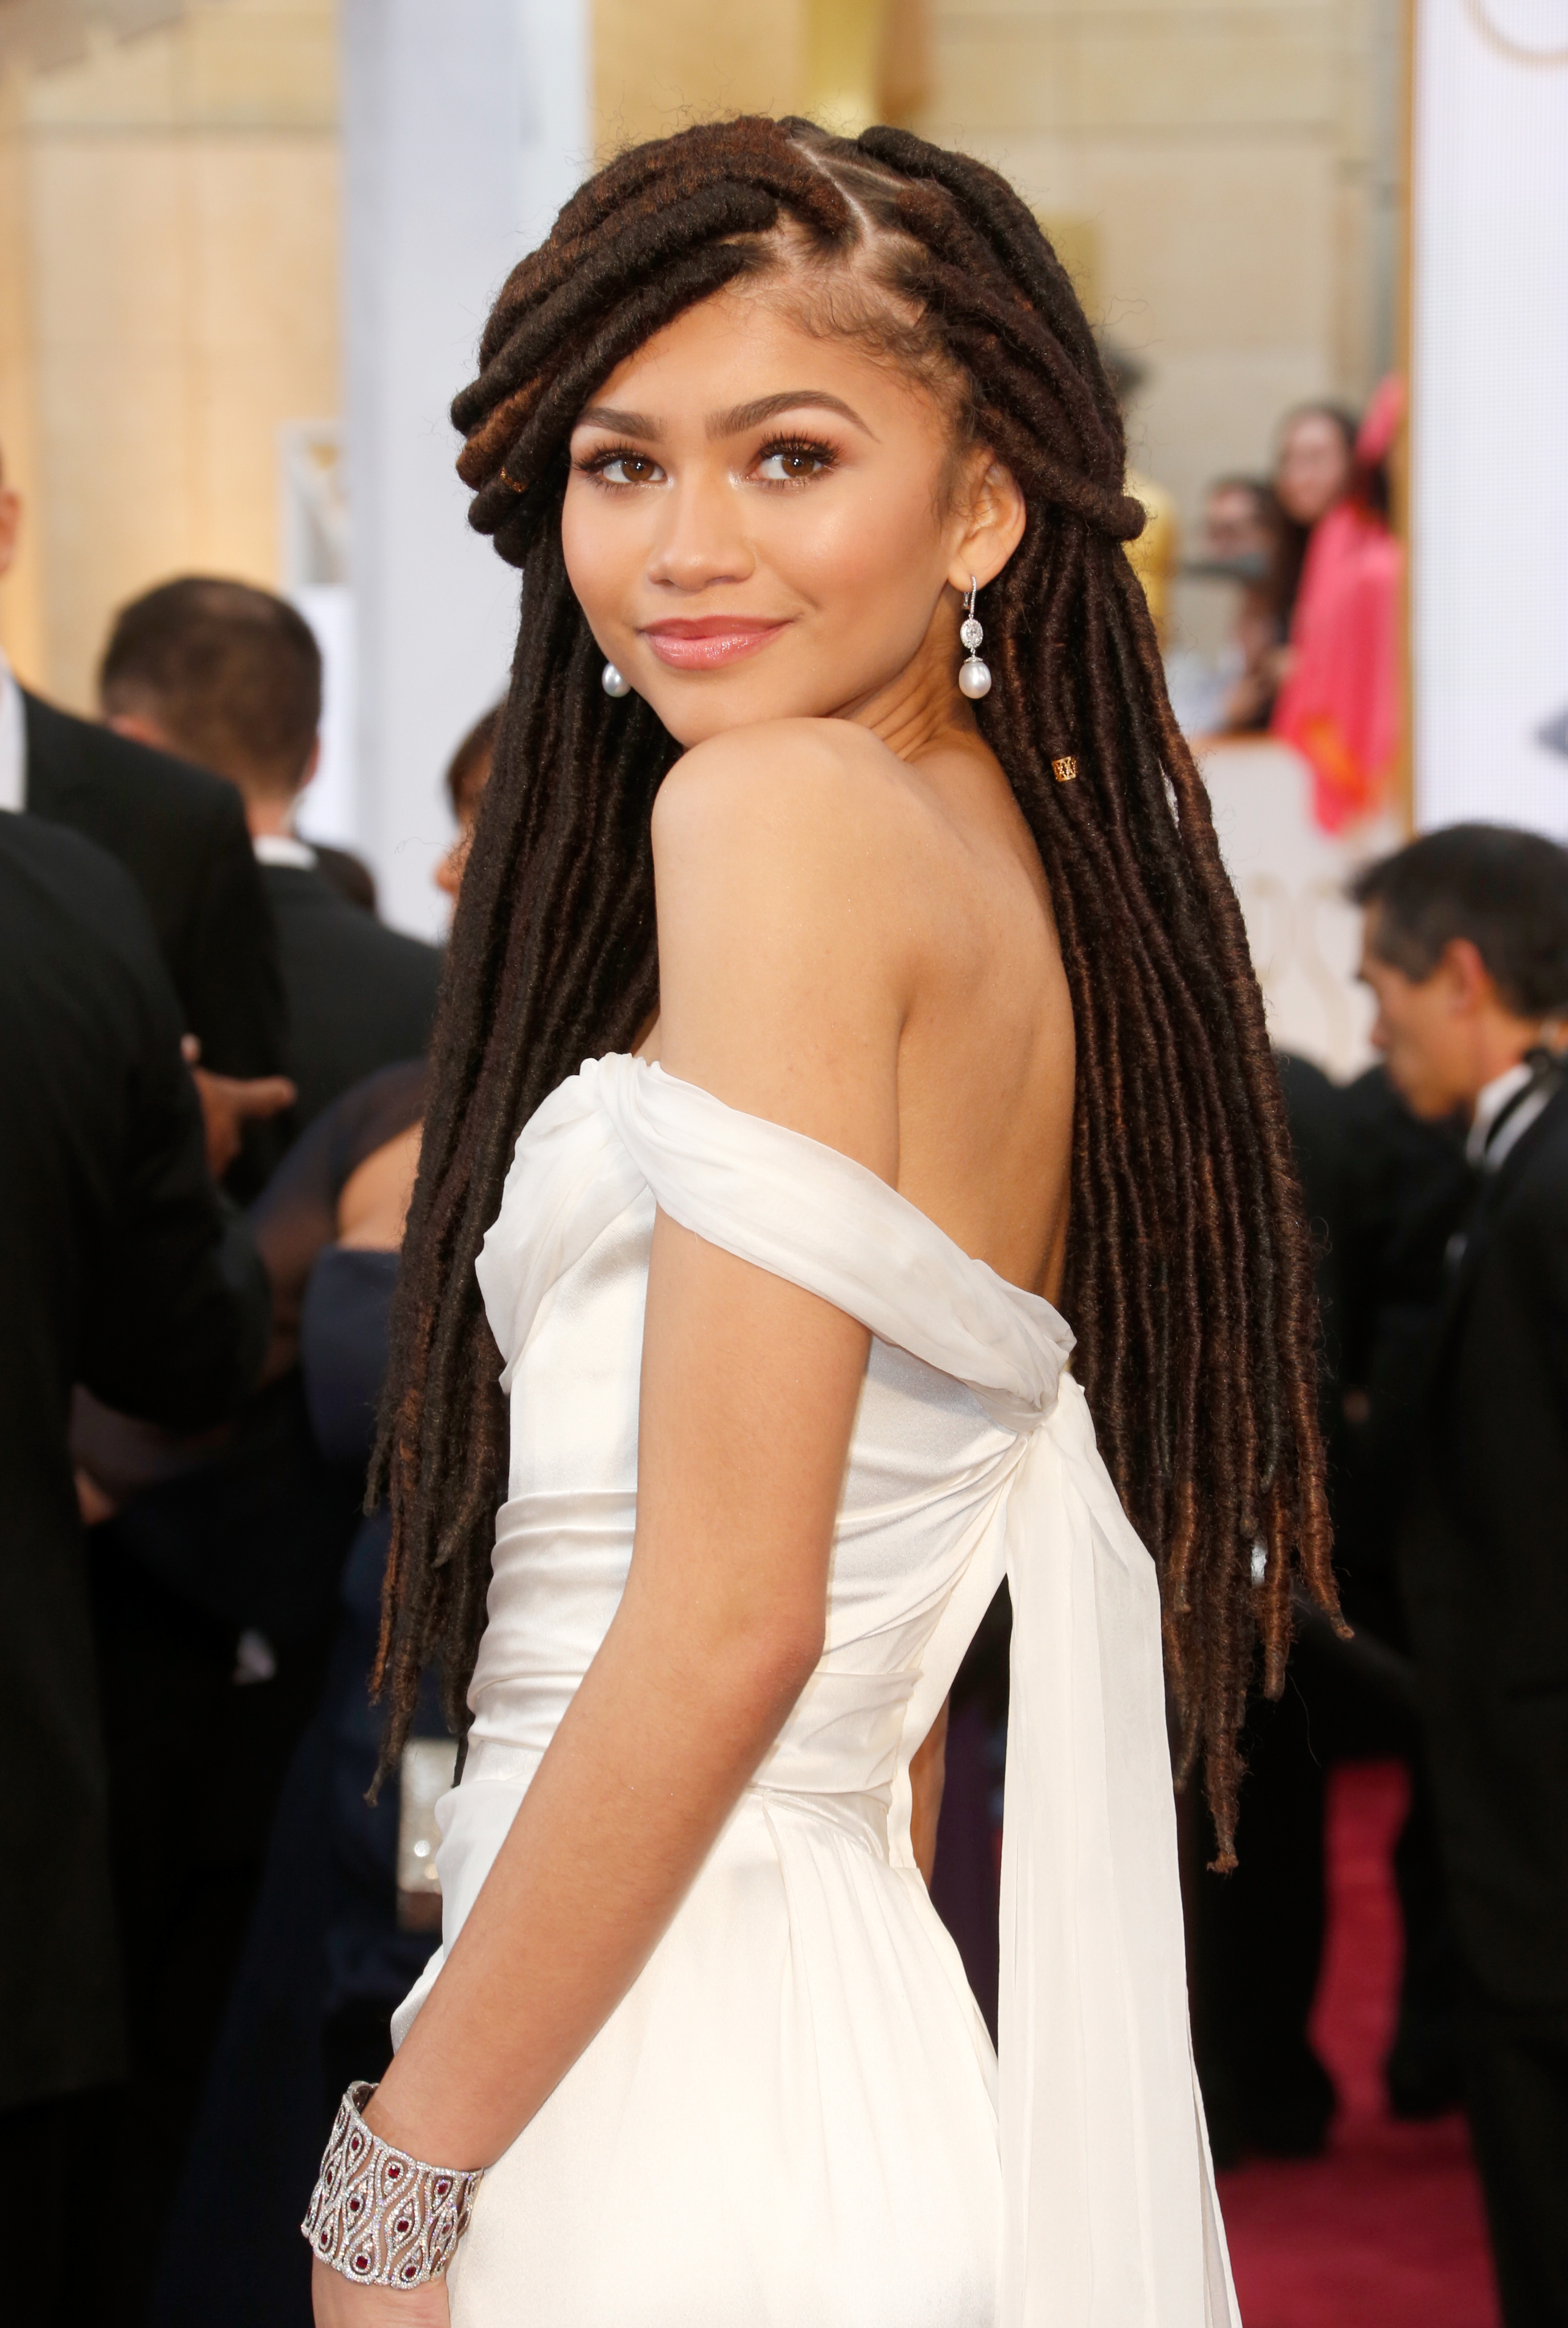 Zendaya at the 87th Annual Academy Awards on February 22, 2015 in Hollywood, California. | Source: Getty Images